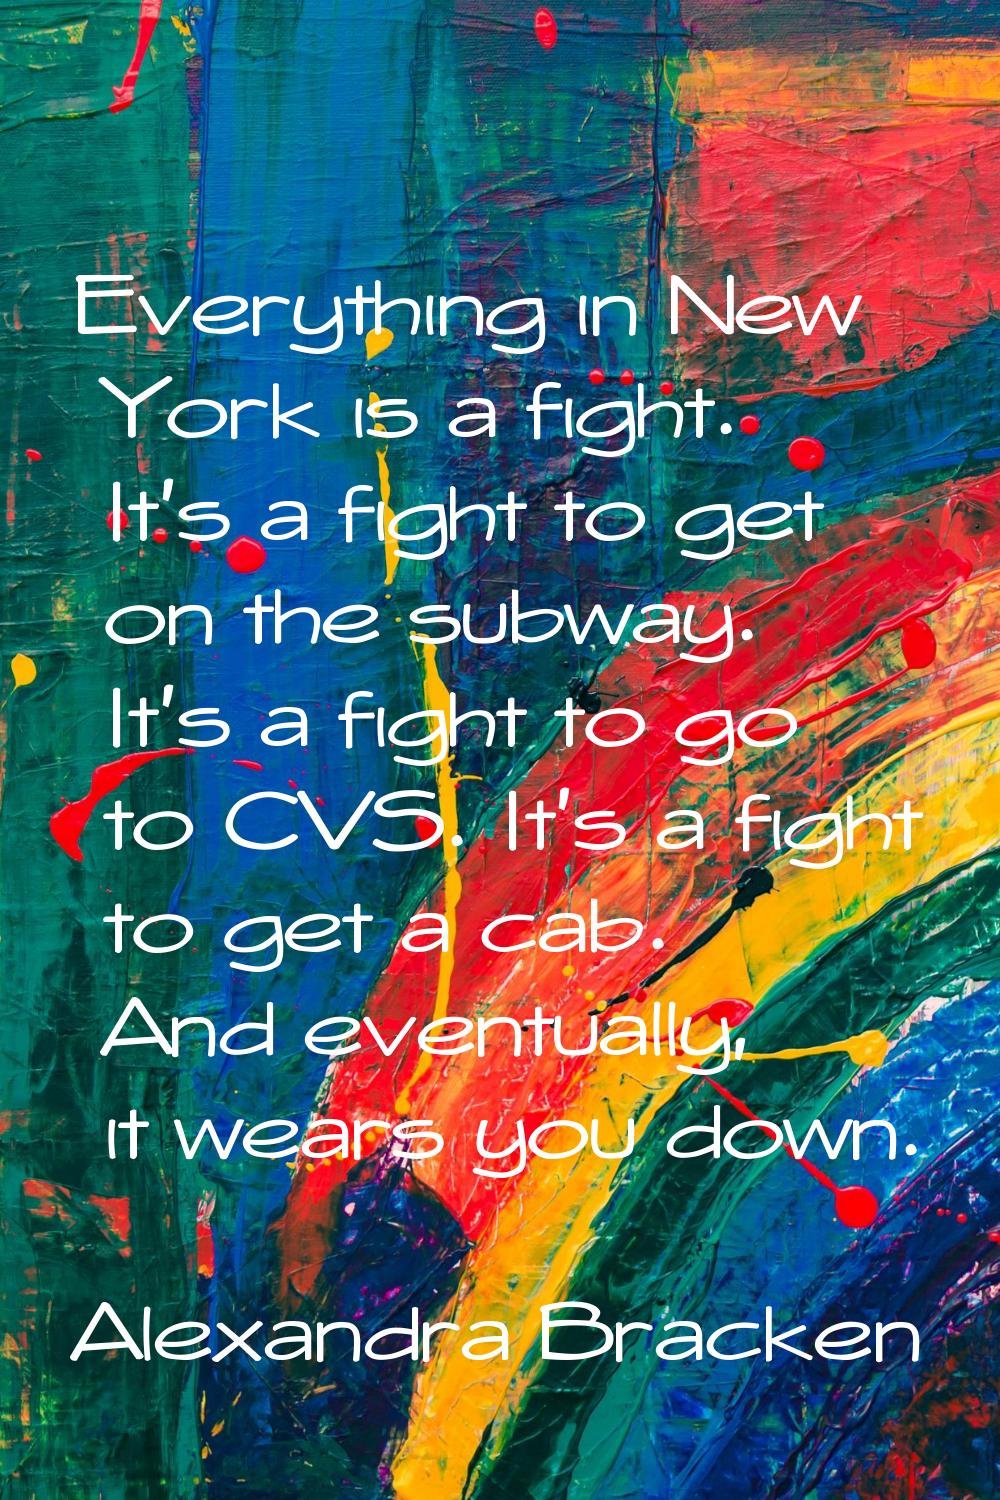 Everything in New York is a fight. It's a fight to get on the subway. It's a fight to go to CVS. It